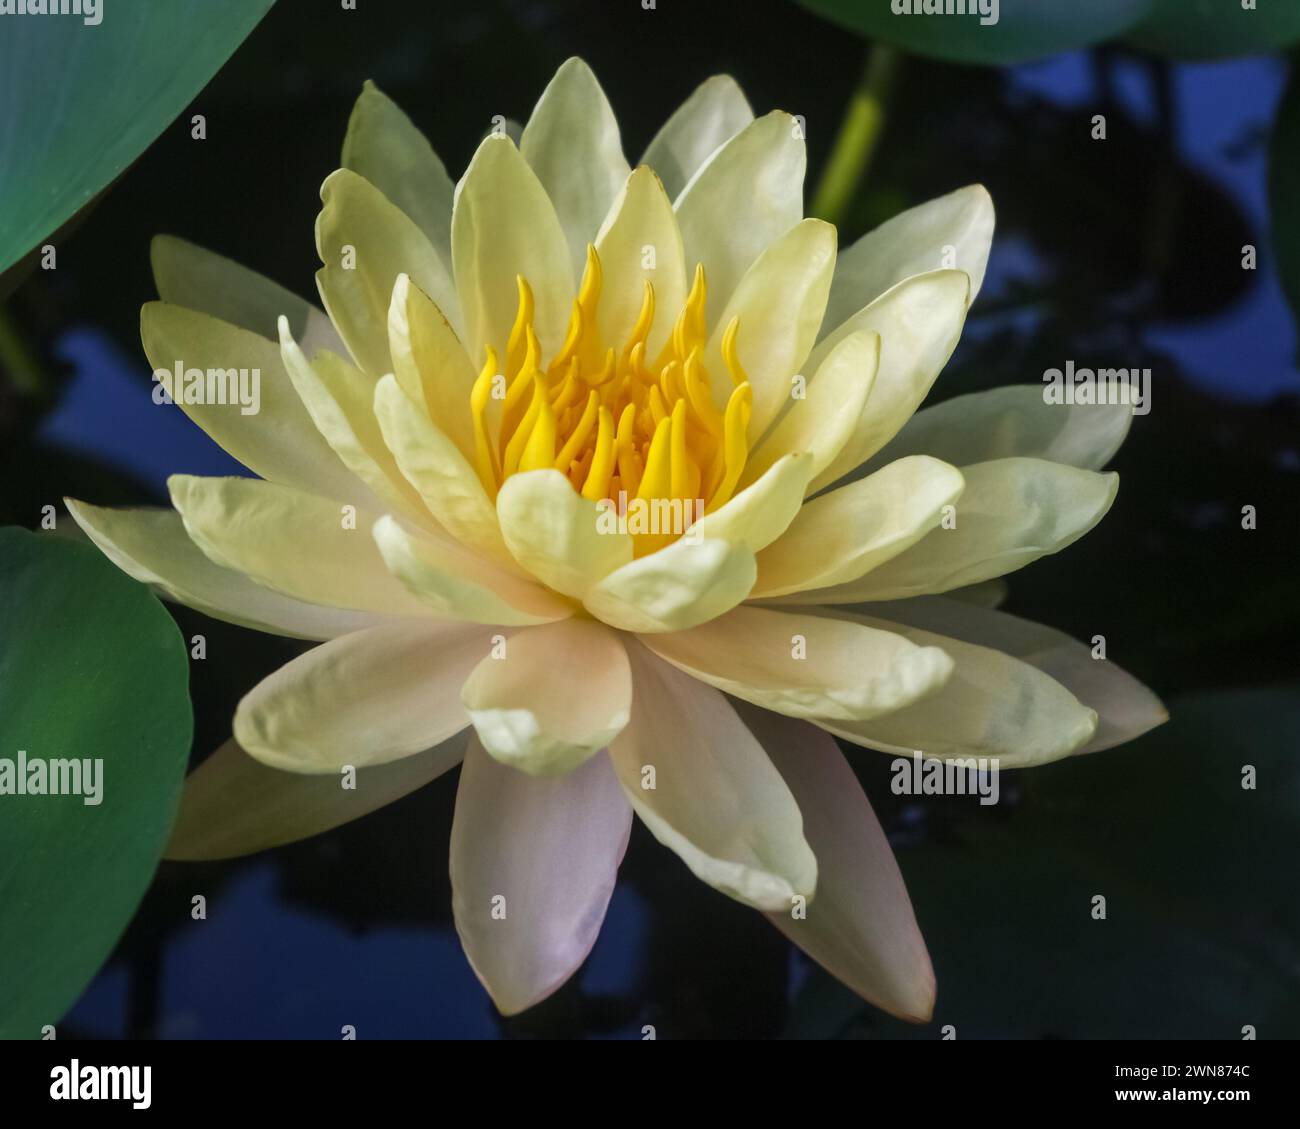 Closeup view of fresh yellow water lily mangkala ubol flower blooming in pond Stock Photo